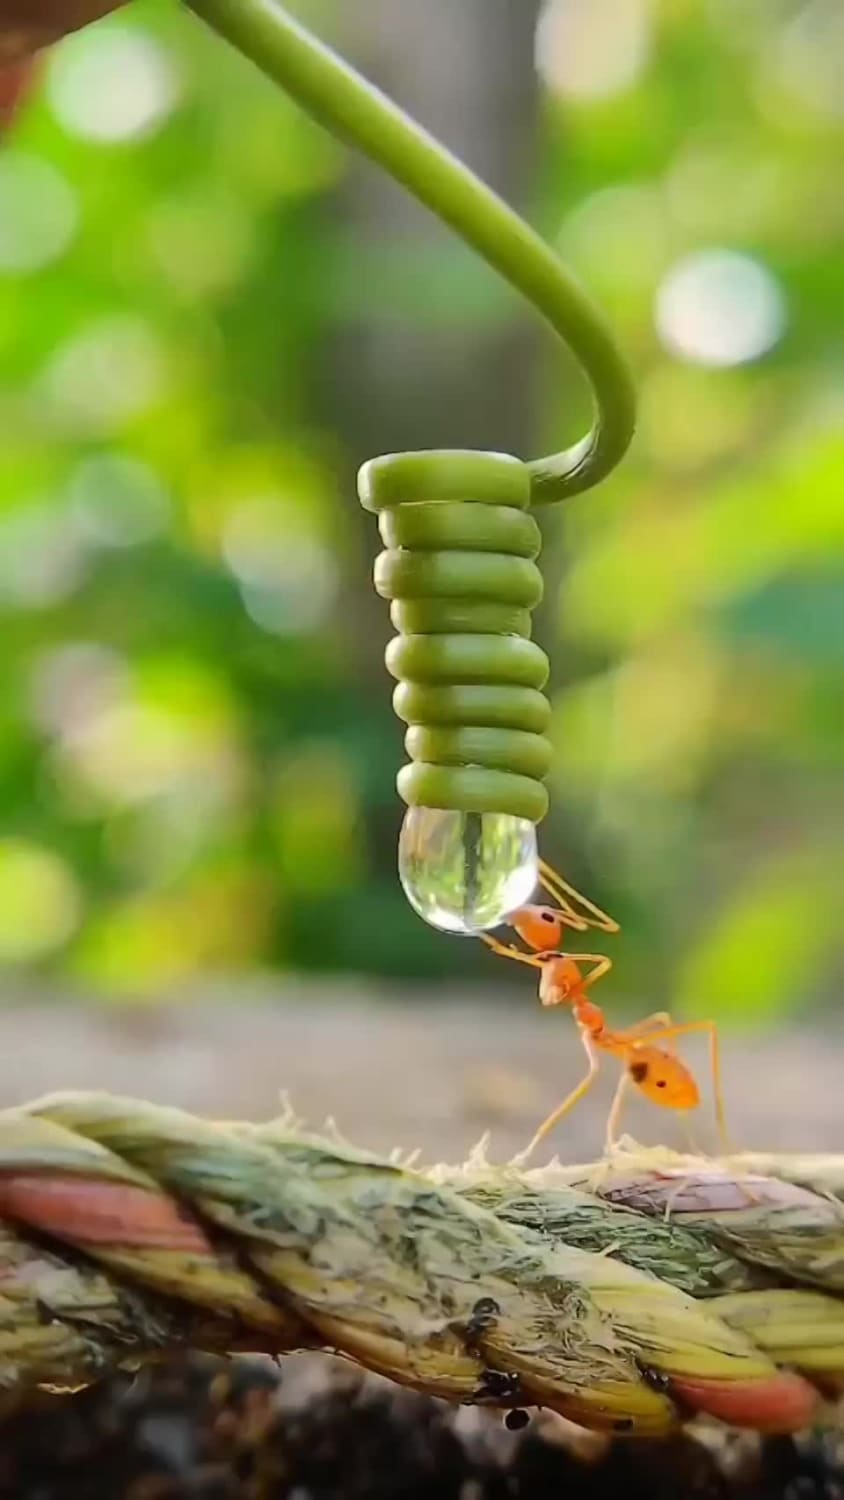 A thirsty ant drinking from a drop of water